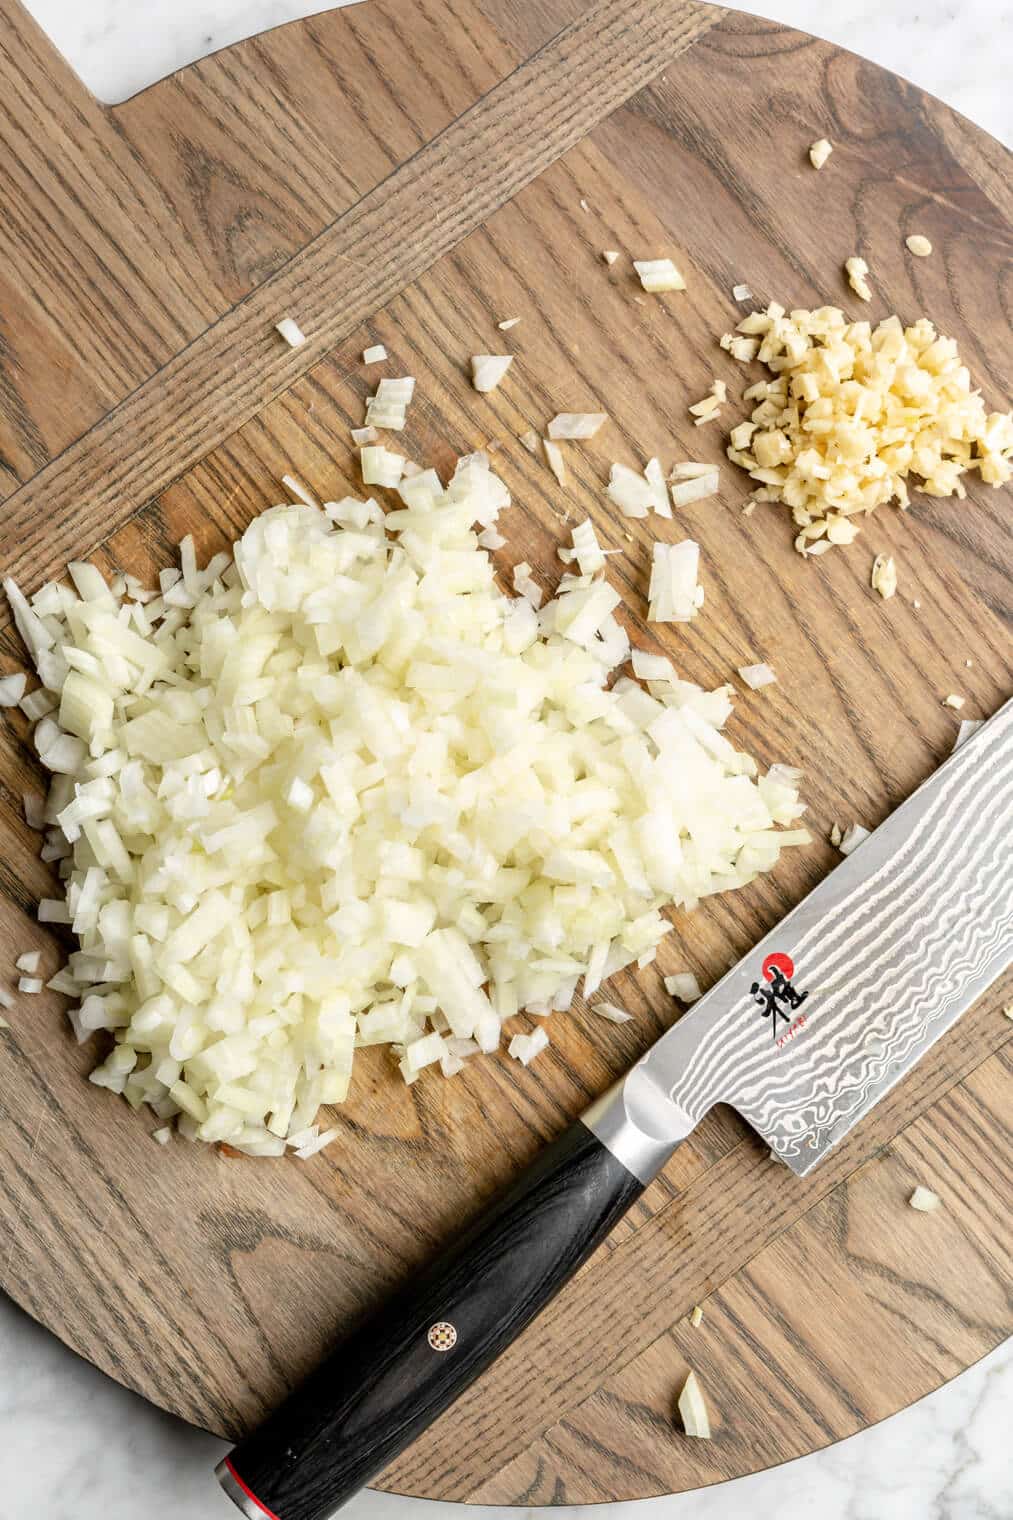 There is a wooden cutting board with diced onion and minced garlic with a chef's knife.